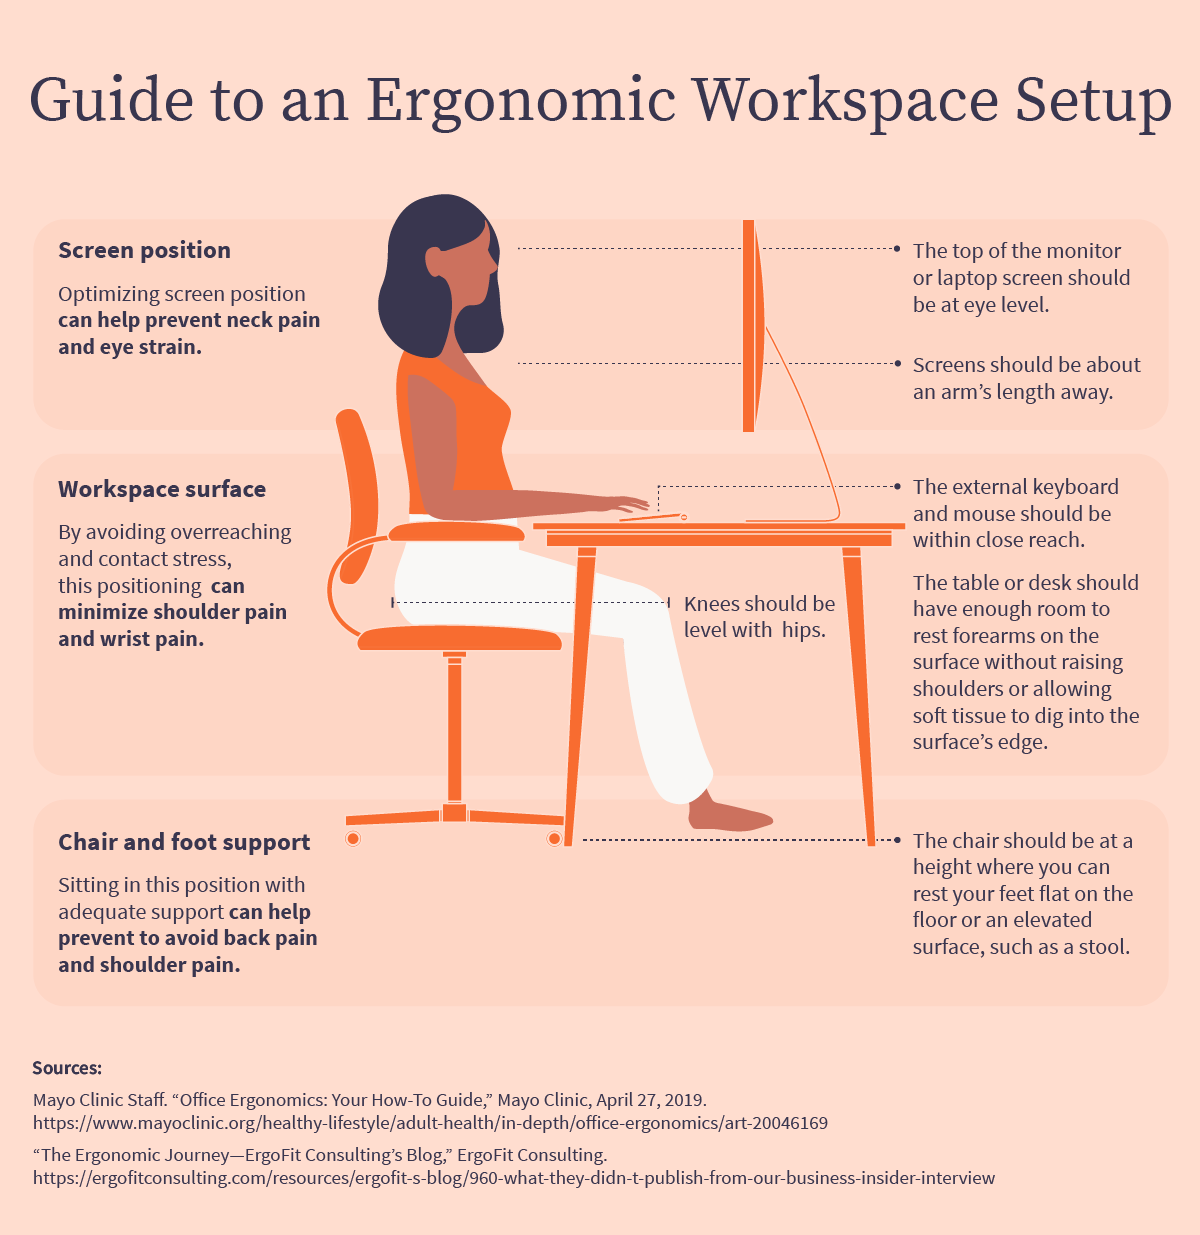 https://www.publichealthdegrees.org/wp-content/uploads/sites/53/2021/09/10399_How-to-Create-an-Ergonomically-Friendly-Work-From-Home-Setup_ergonomic_guide_v4.png